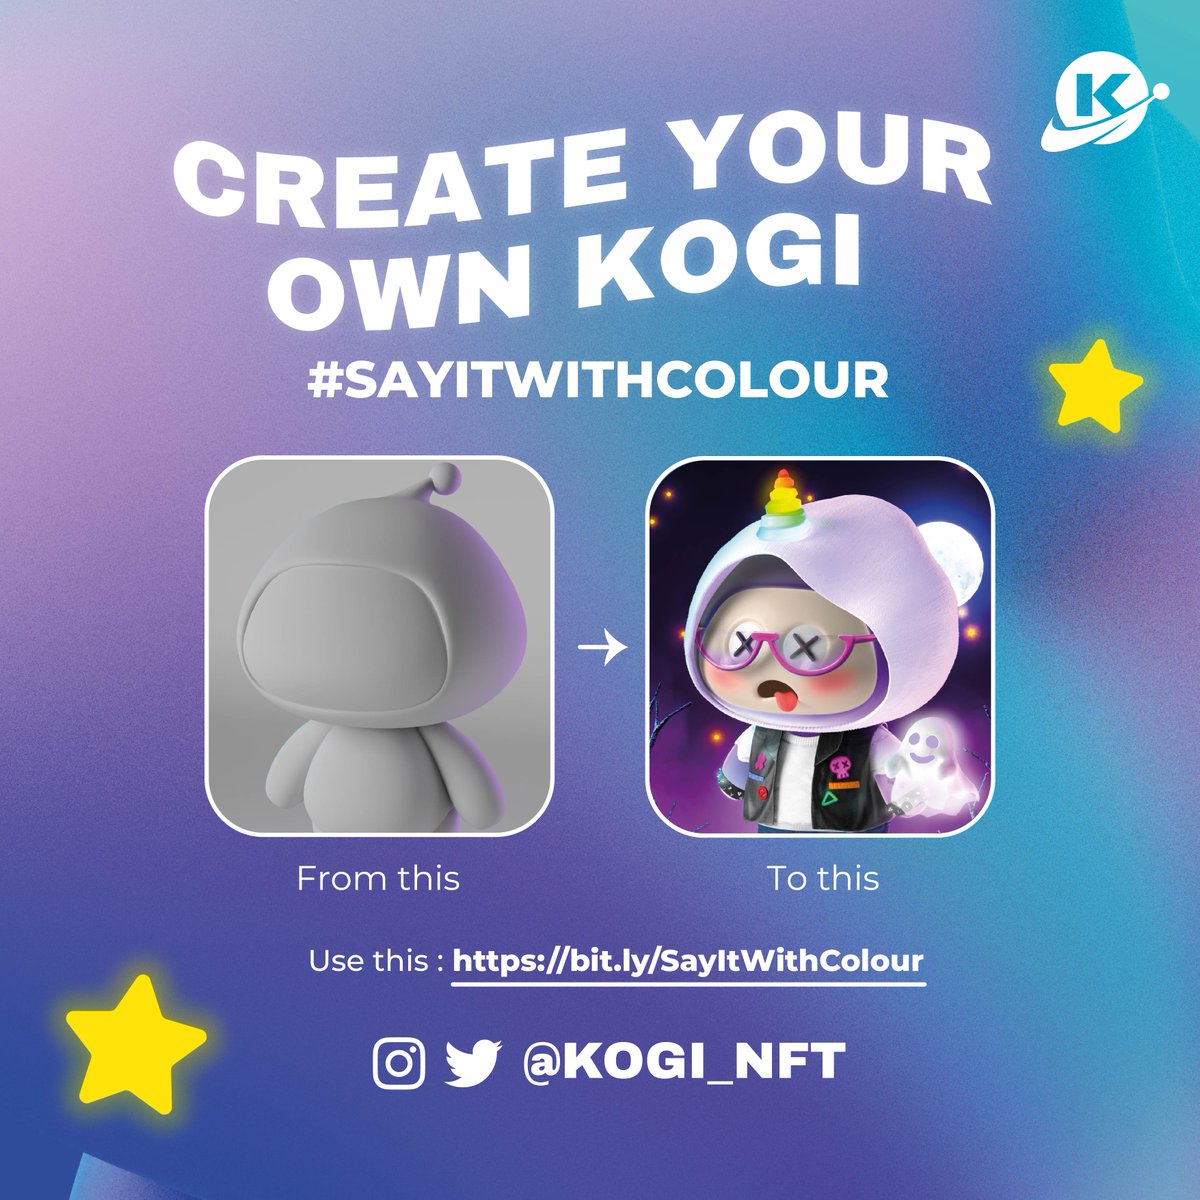 Kogi, and our whole kind, was born out of childhood dreams.✨So the only way to bring back Kogi home is to create a derivative, reimagining Kogi as a portrait of your childhood and to #SayItWithColour. 🌈 Check out this thread to know how you can help!🚀